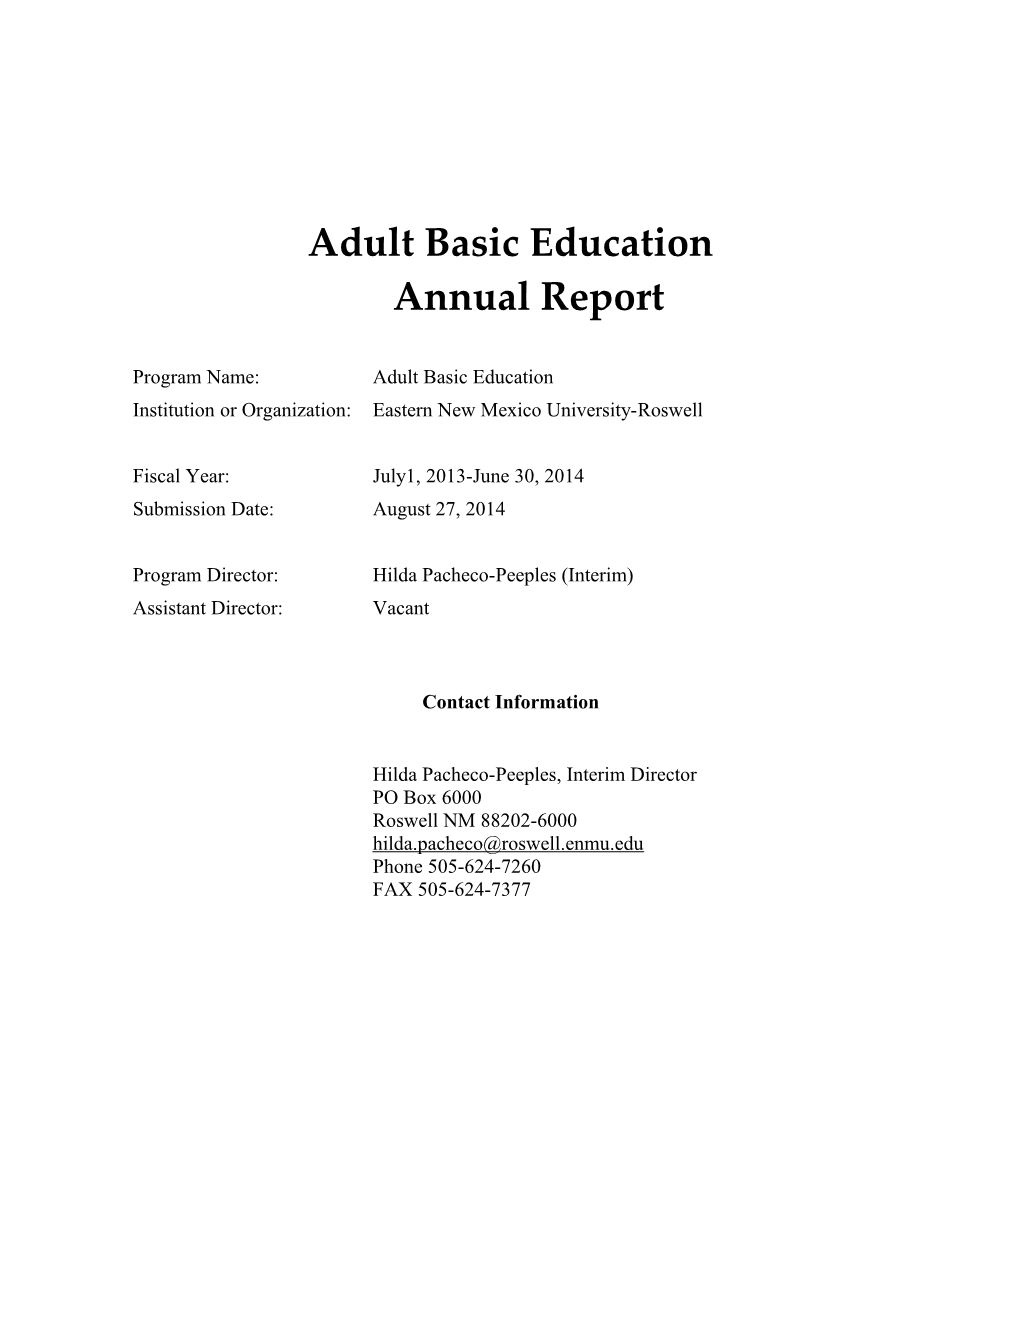 ABE Annual Report